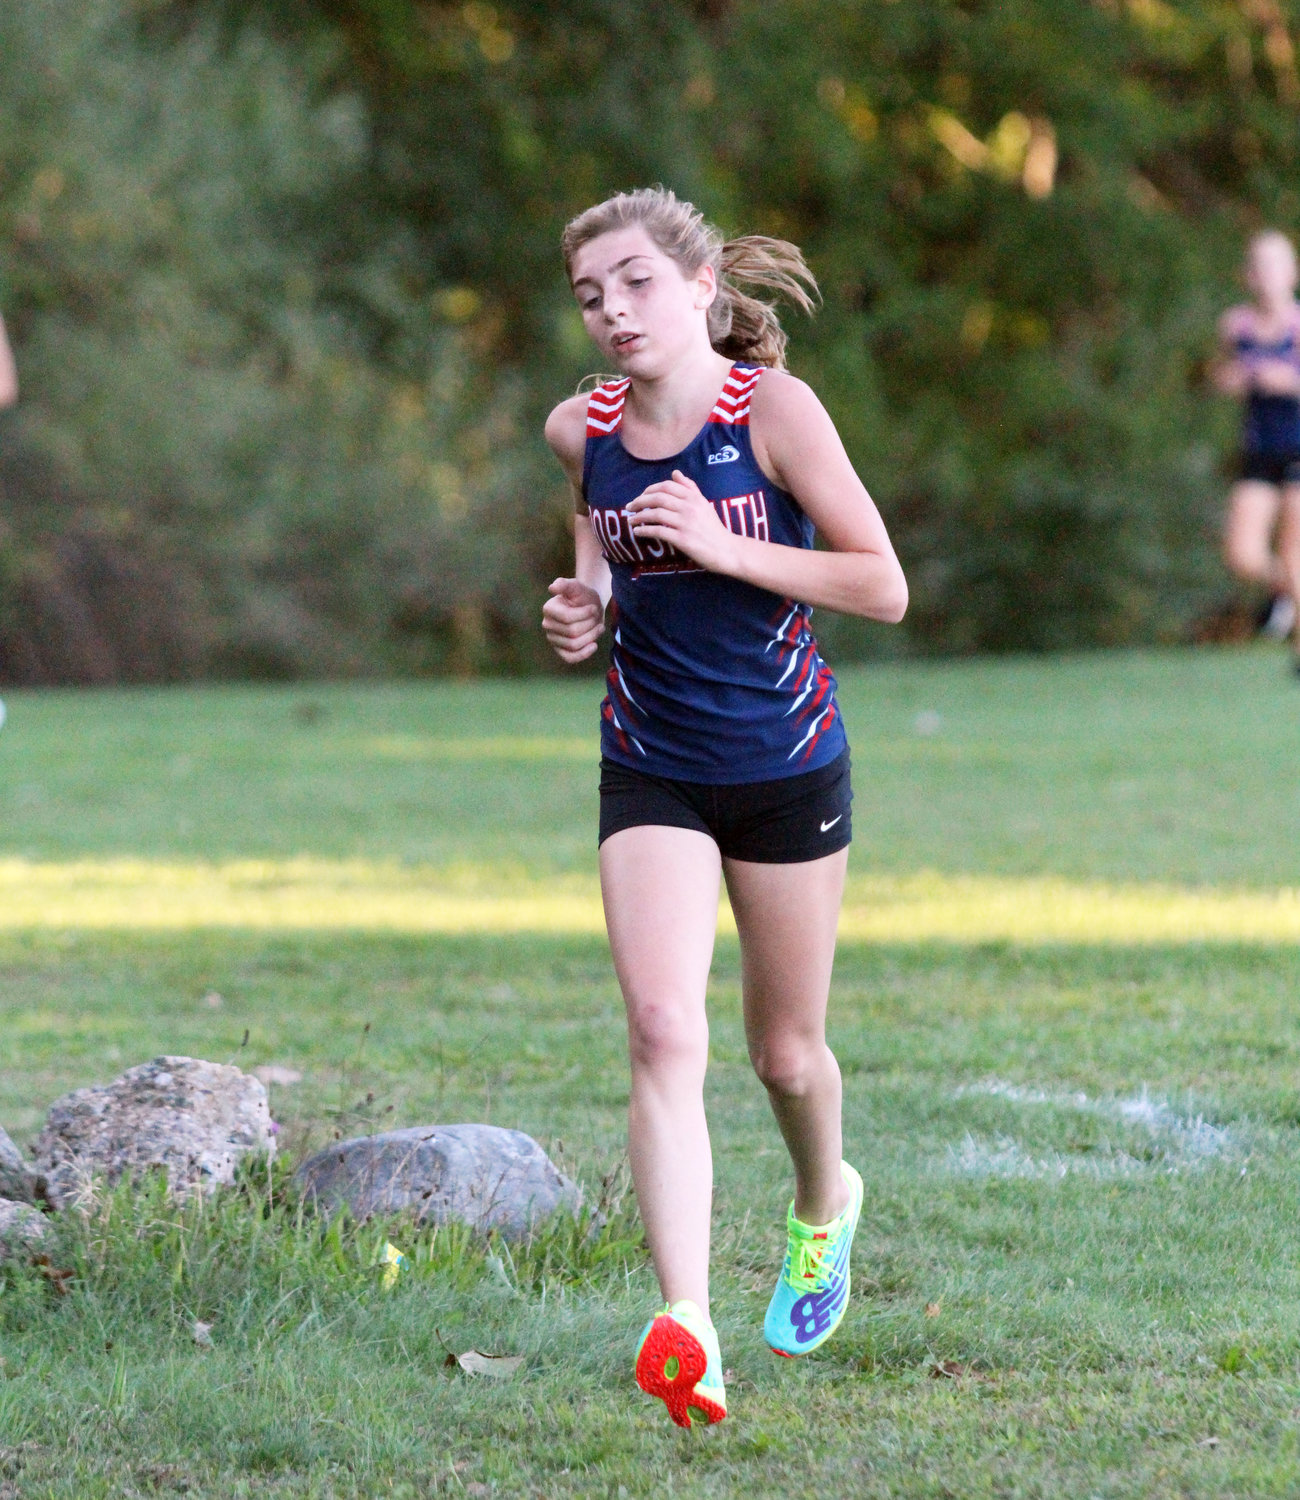 Mae Marston led Portsmouth High’s girls, placing seventh overall in 23:33.